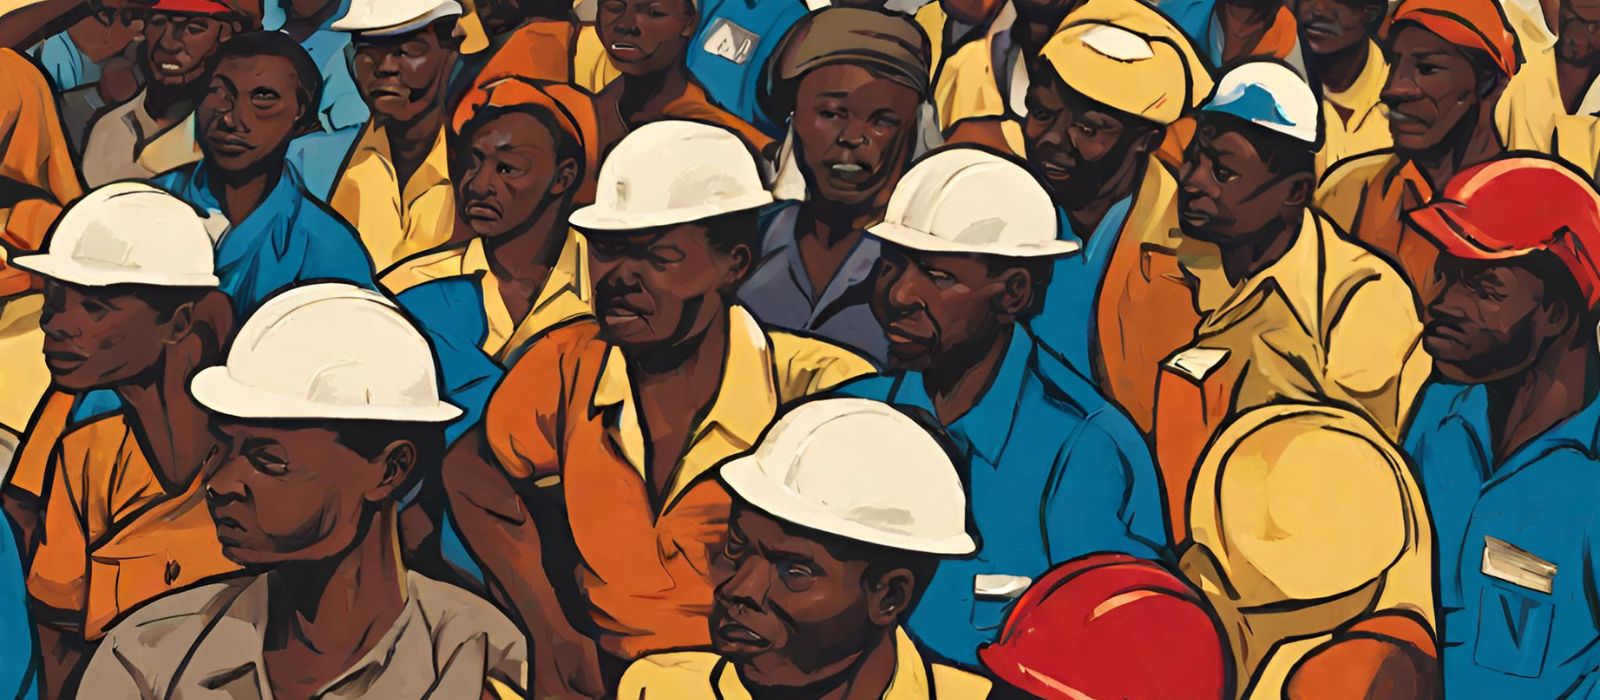 A reflection on International Workers’ Day across Africa